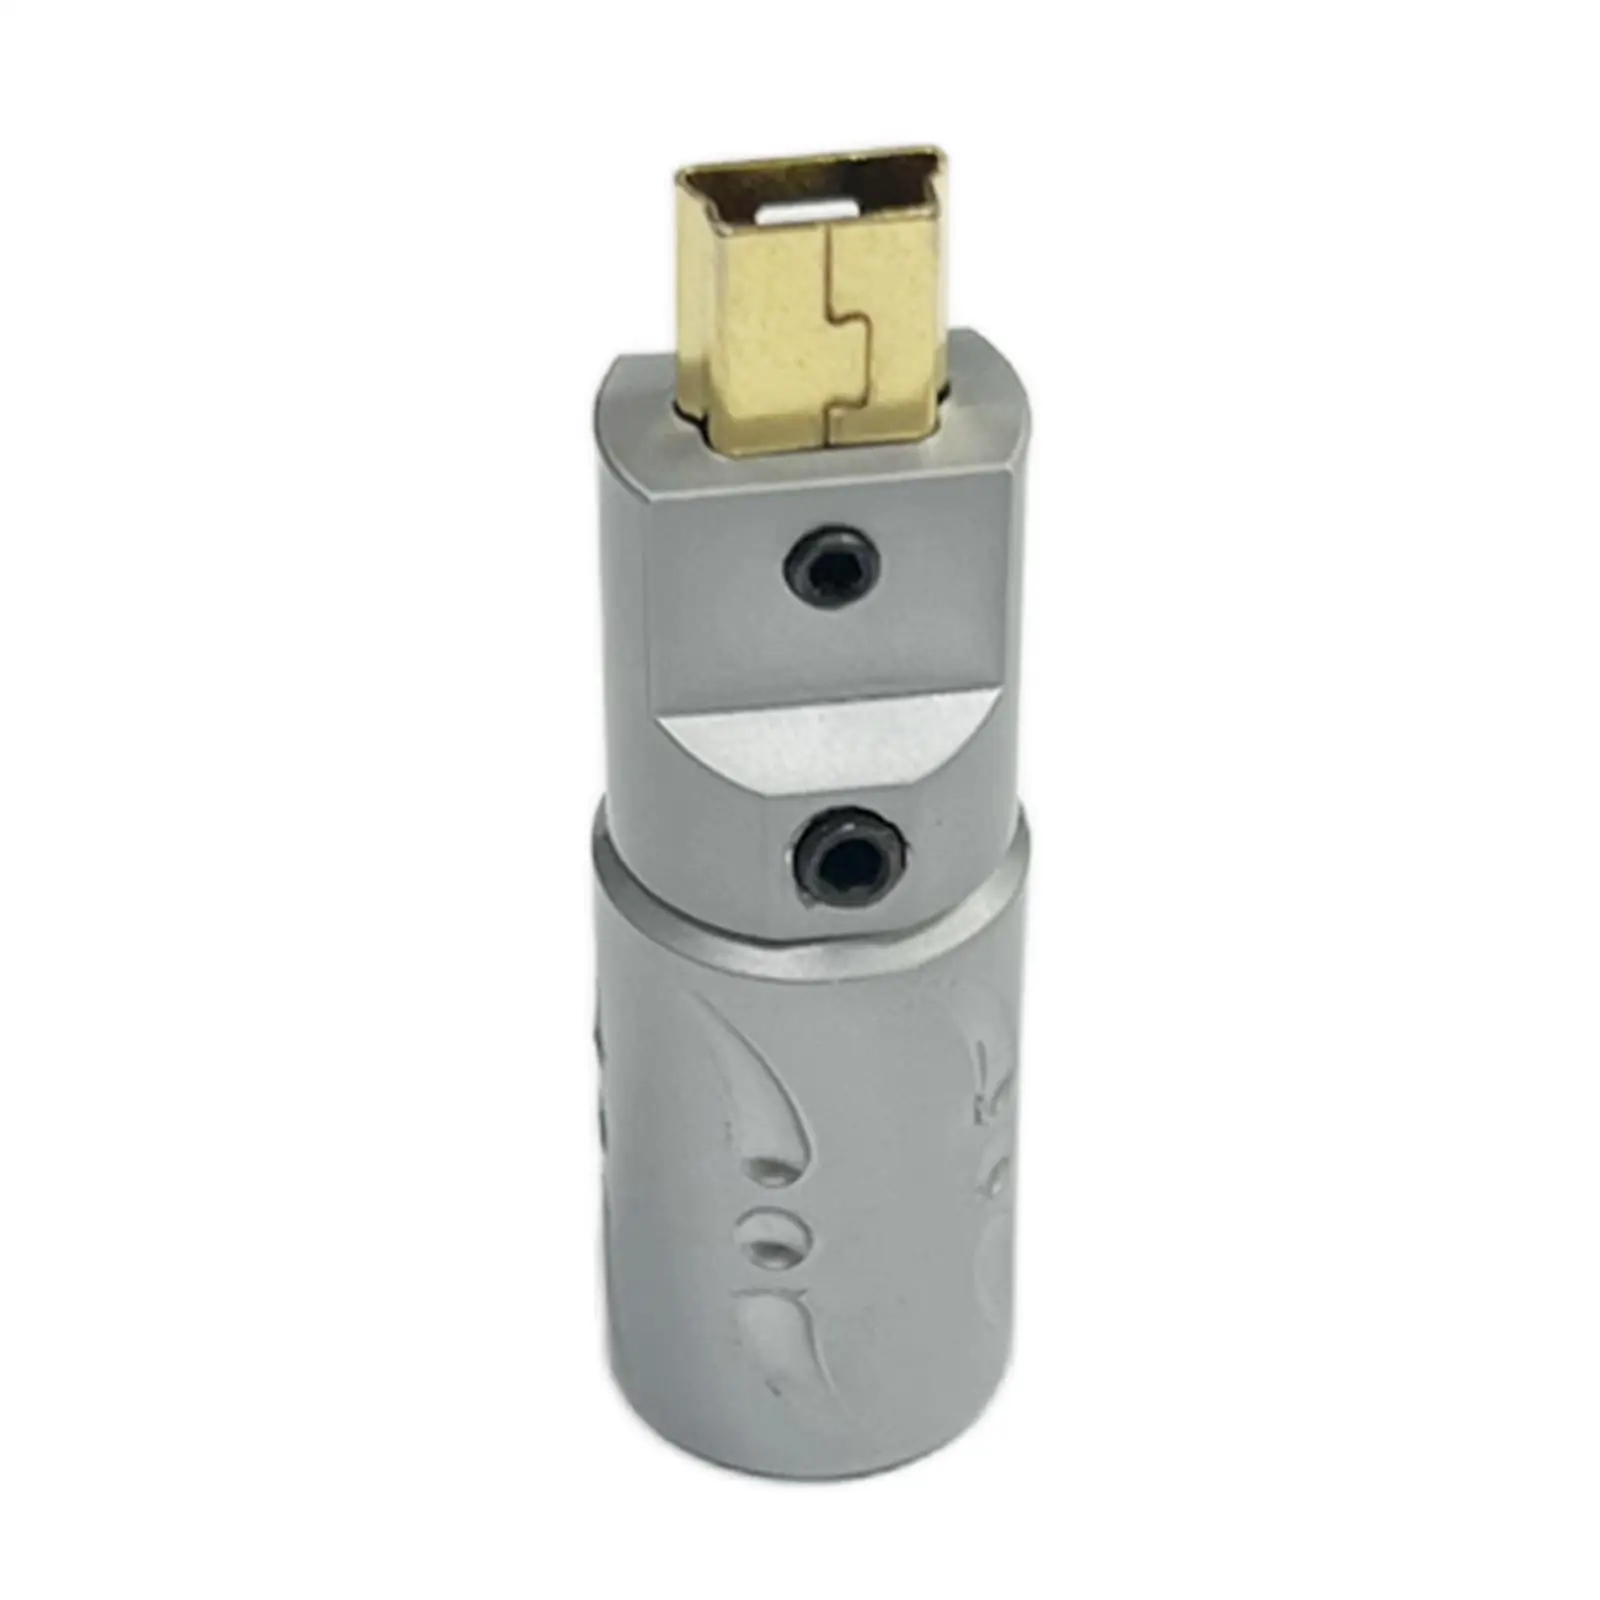 Male Connector Adapter USB Connector for Computer Mobile Phone